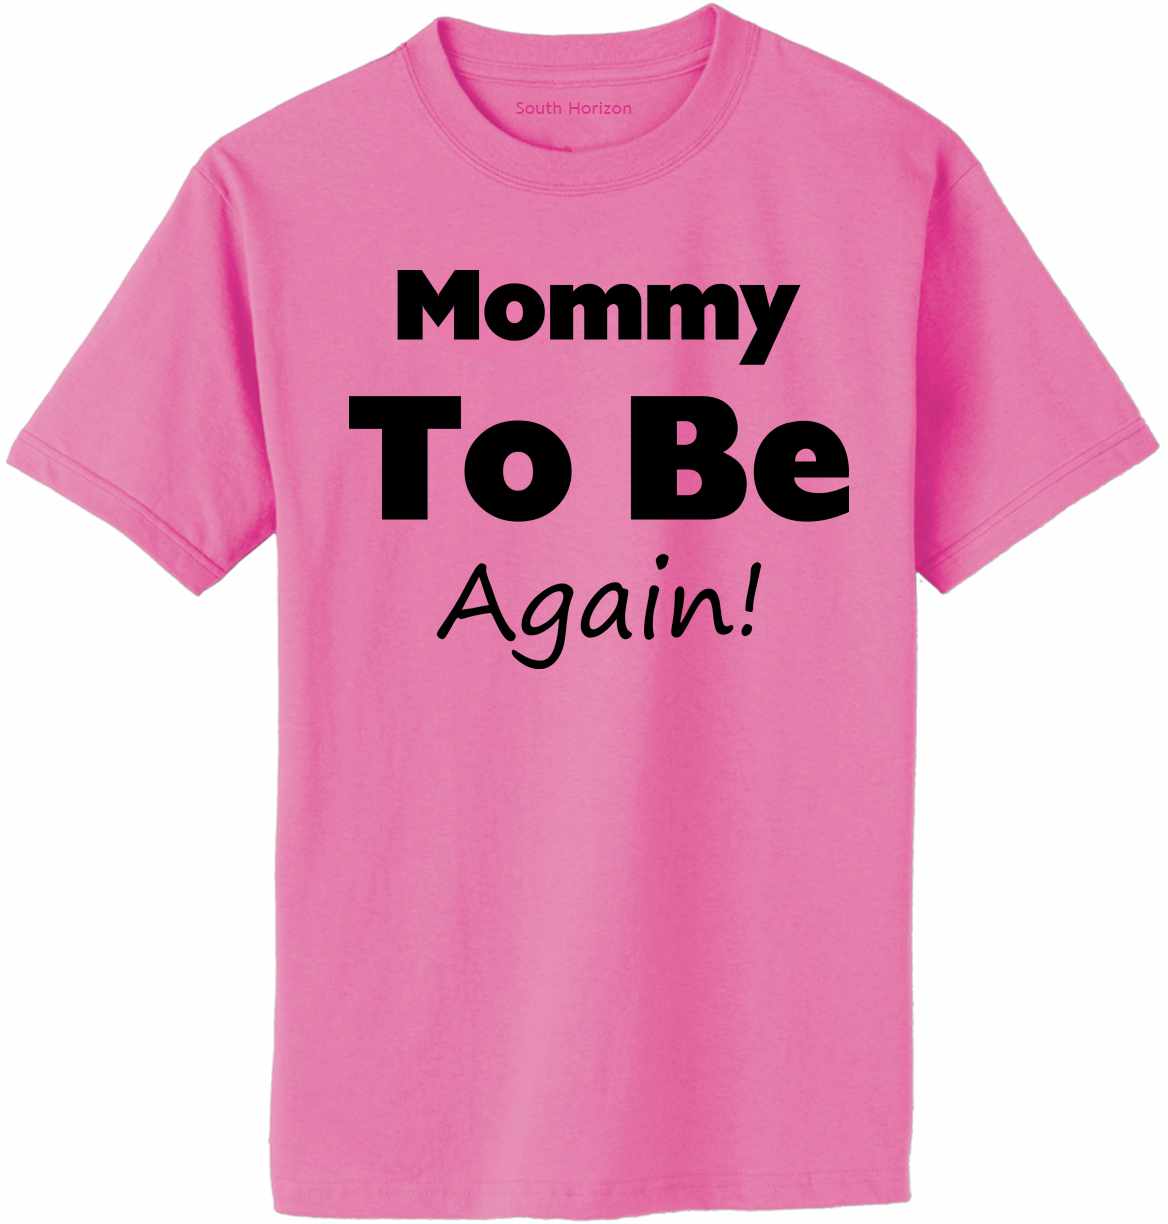 Mommy To Be Again Adult T-Shirt (#914-1)